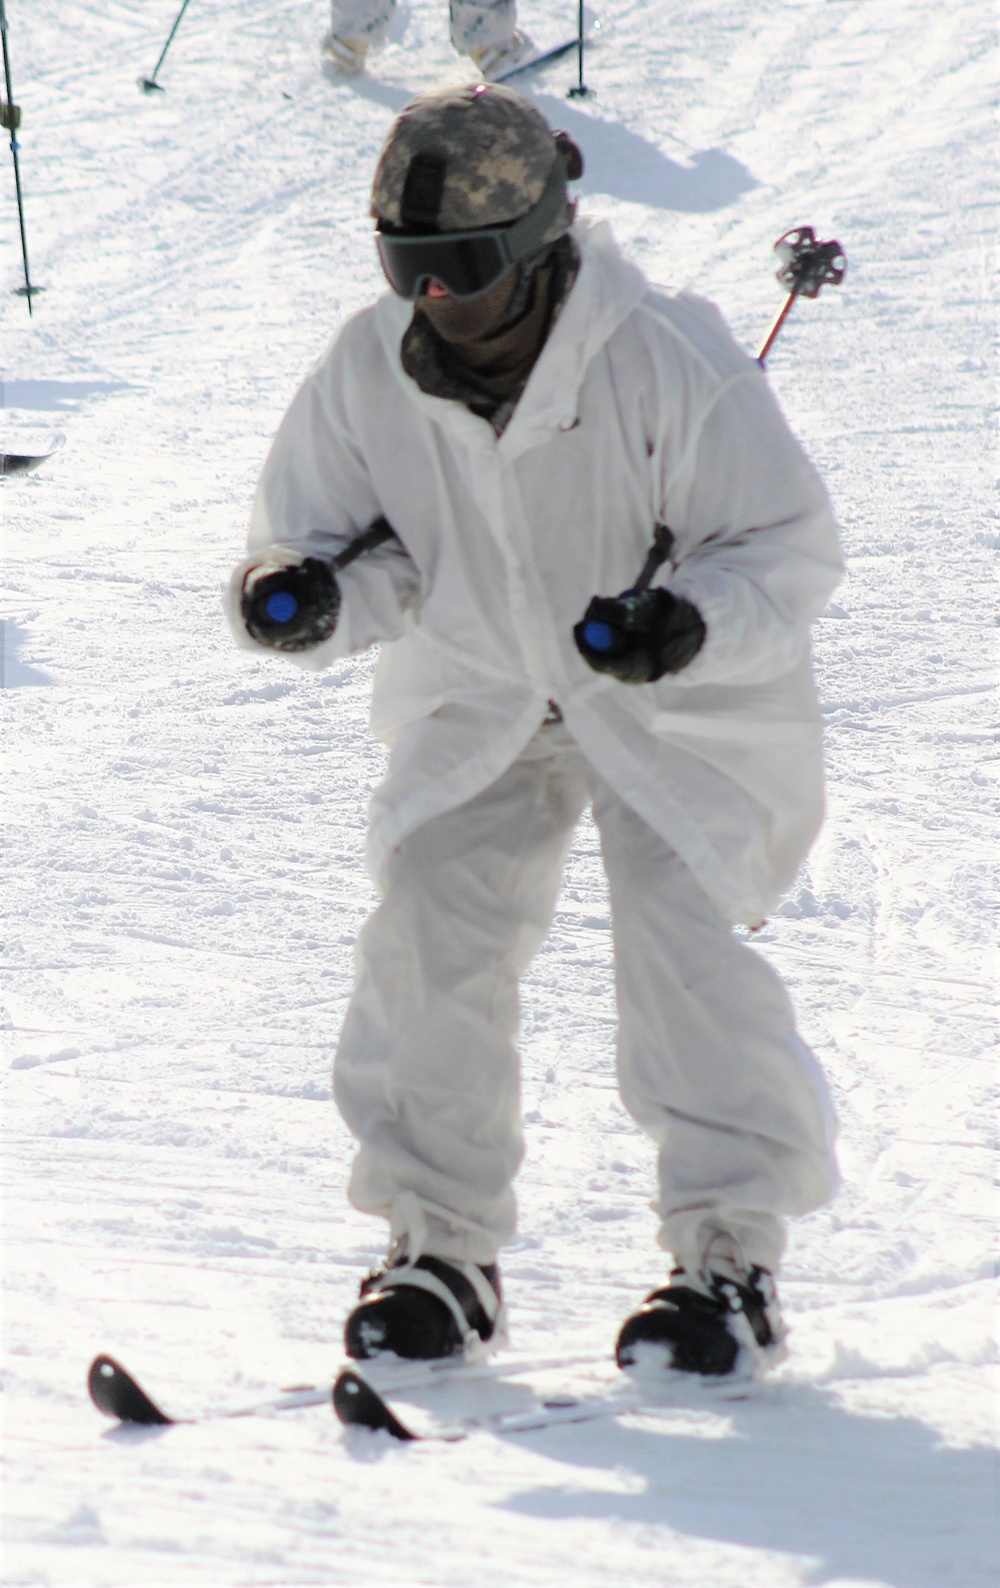 CWOC Class 18-04 students learn skiing techniques during Fort McCoy training